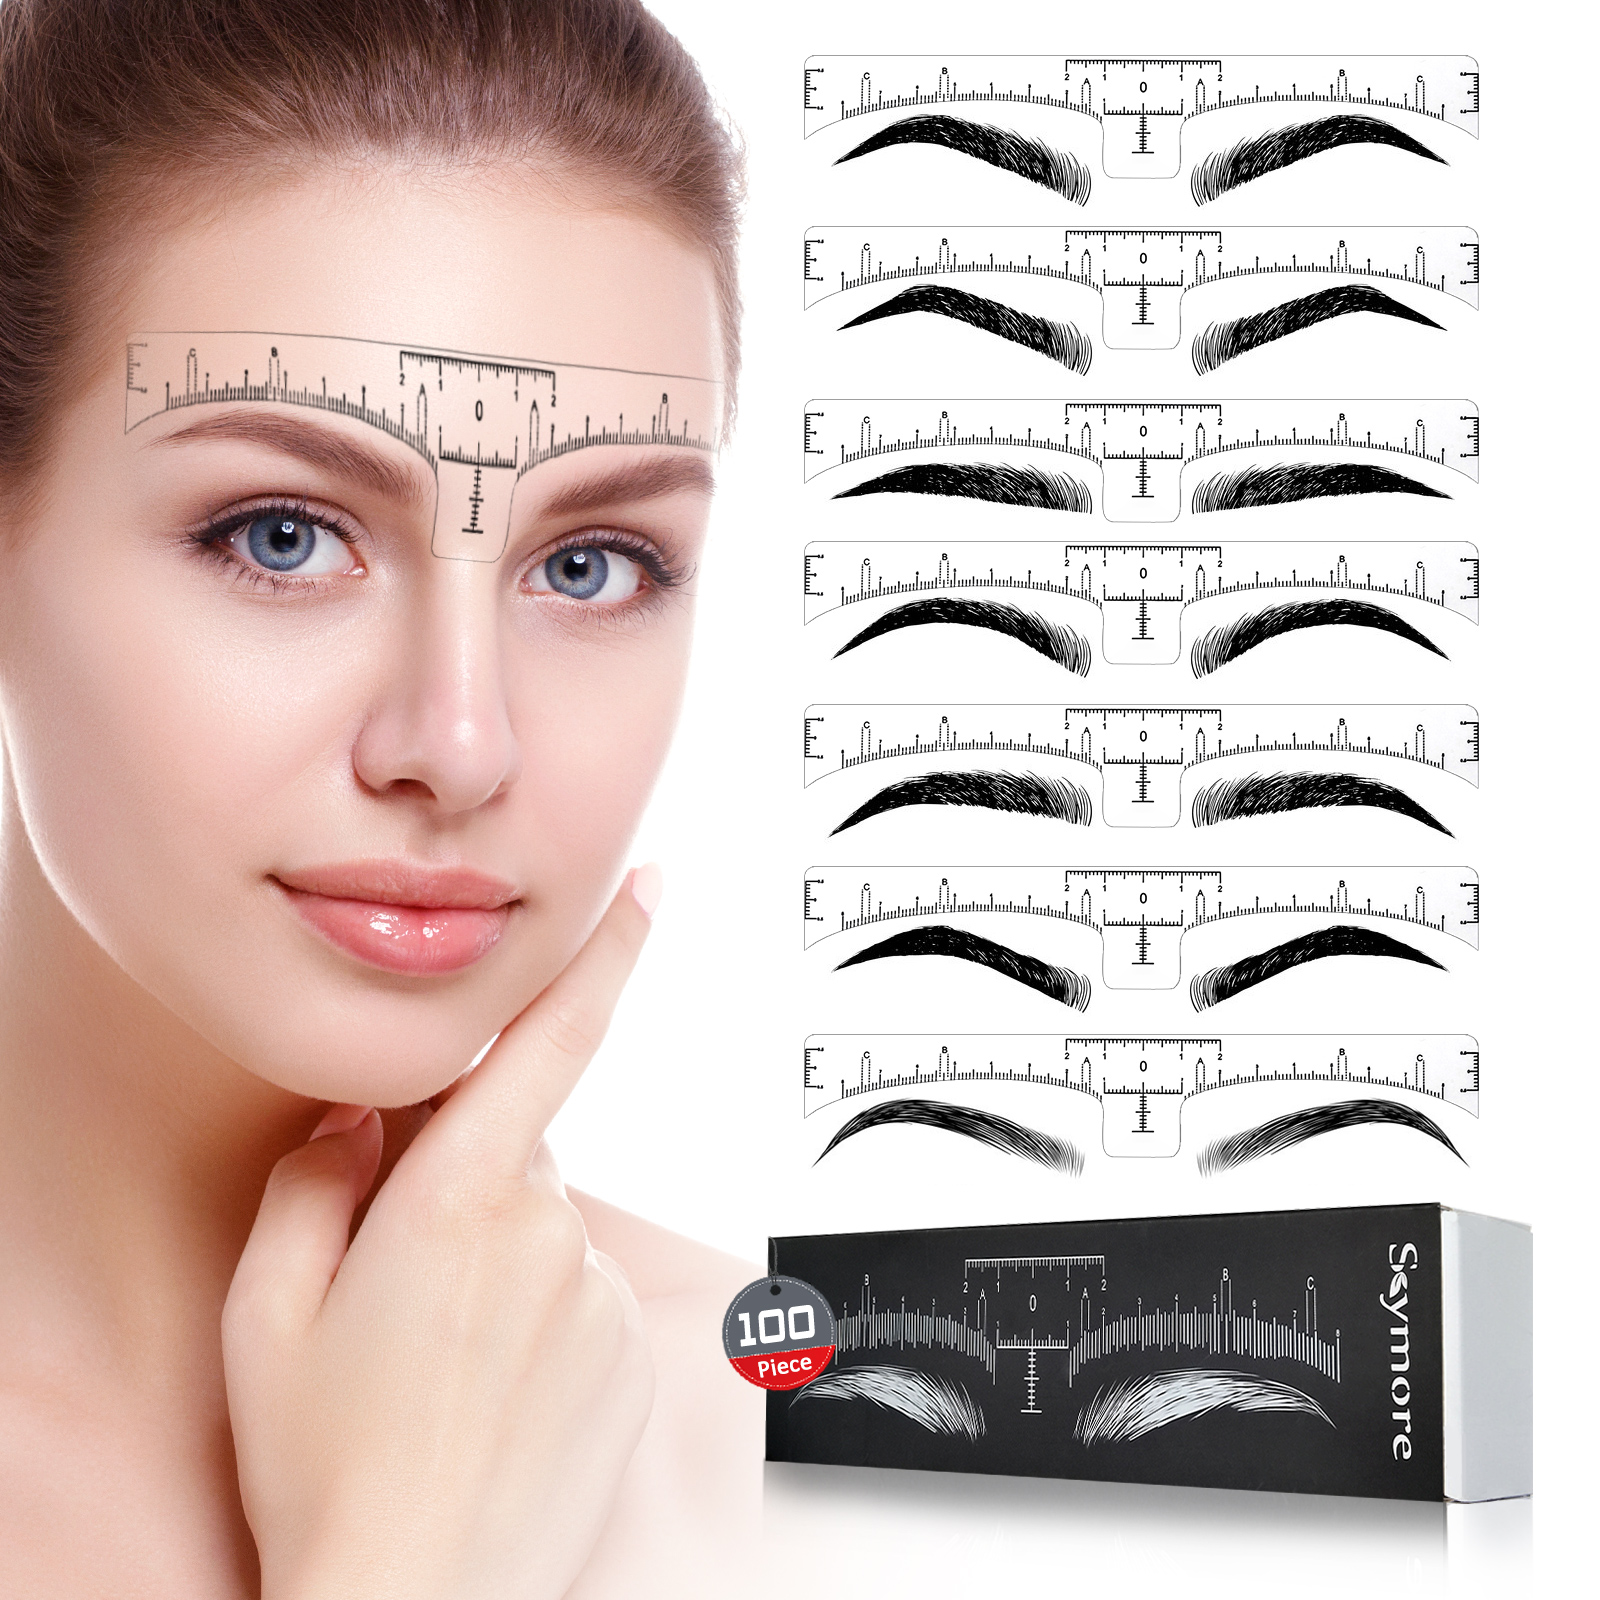 100PCS-Eyebrow-Stencil-One-time-Eyebrow-Grooming-Stencil-Measure-Ruler-Brow-Shaper-Makeup-Shaping-To-1940017-1